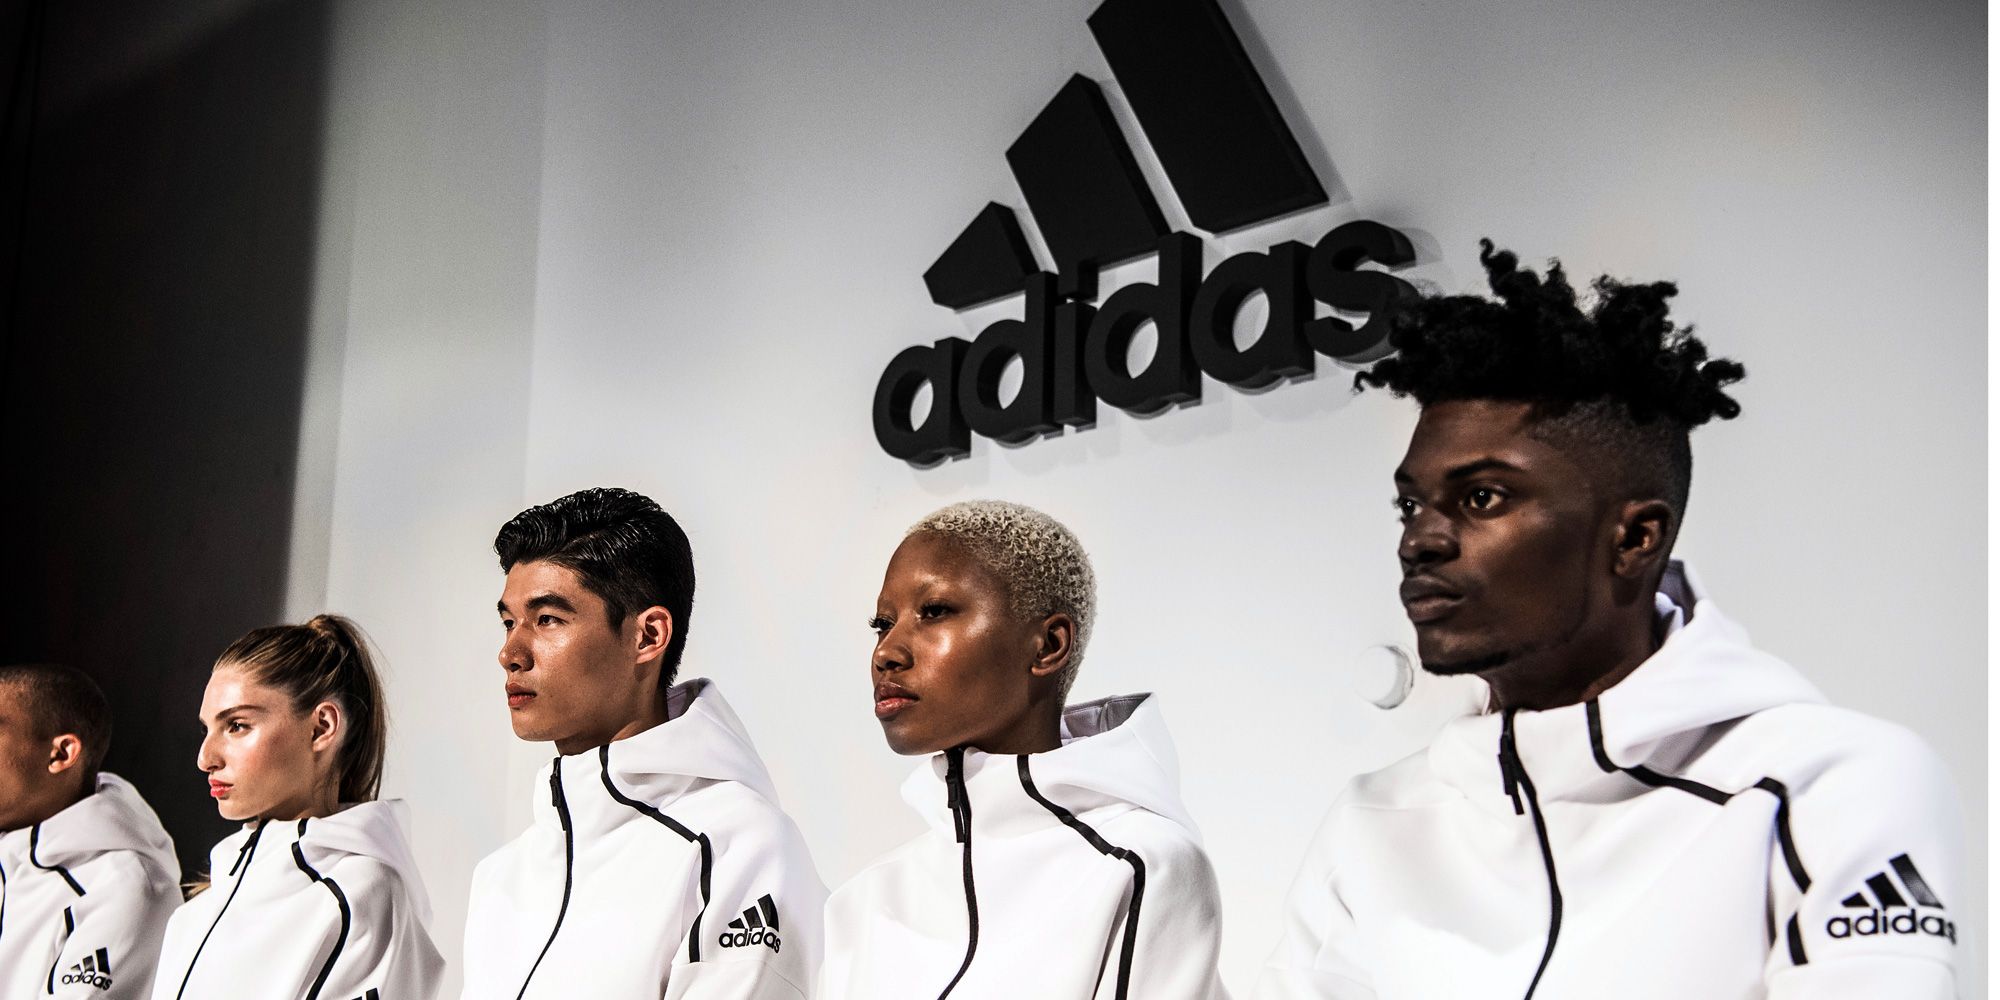 Adidas' Clothing Line Style and Performance